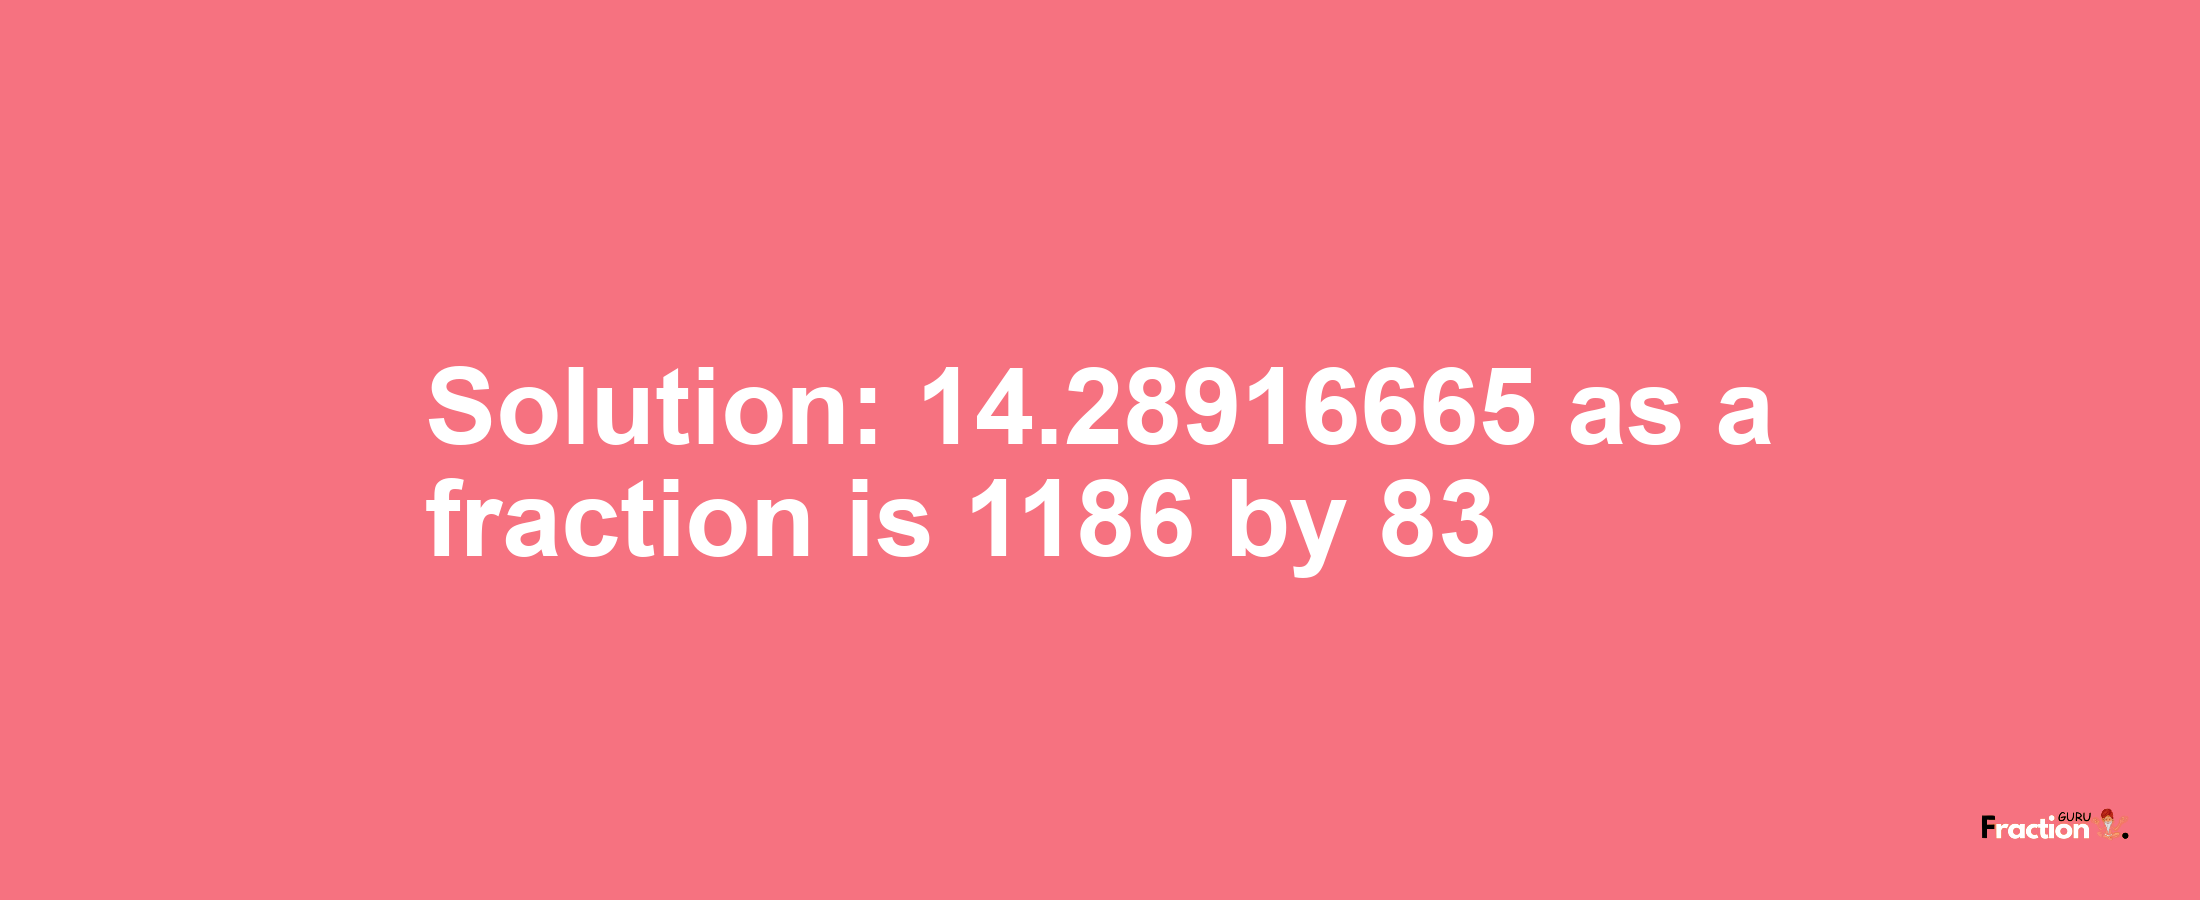 Solution:14.28916665 as a fraction is 1186/83